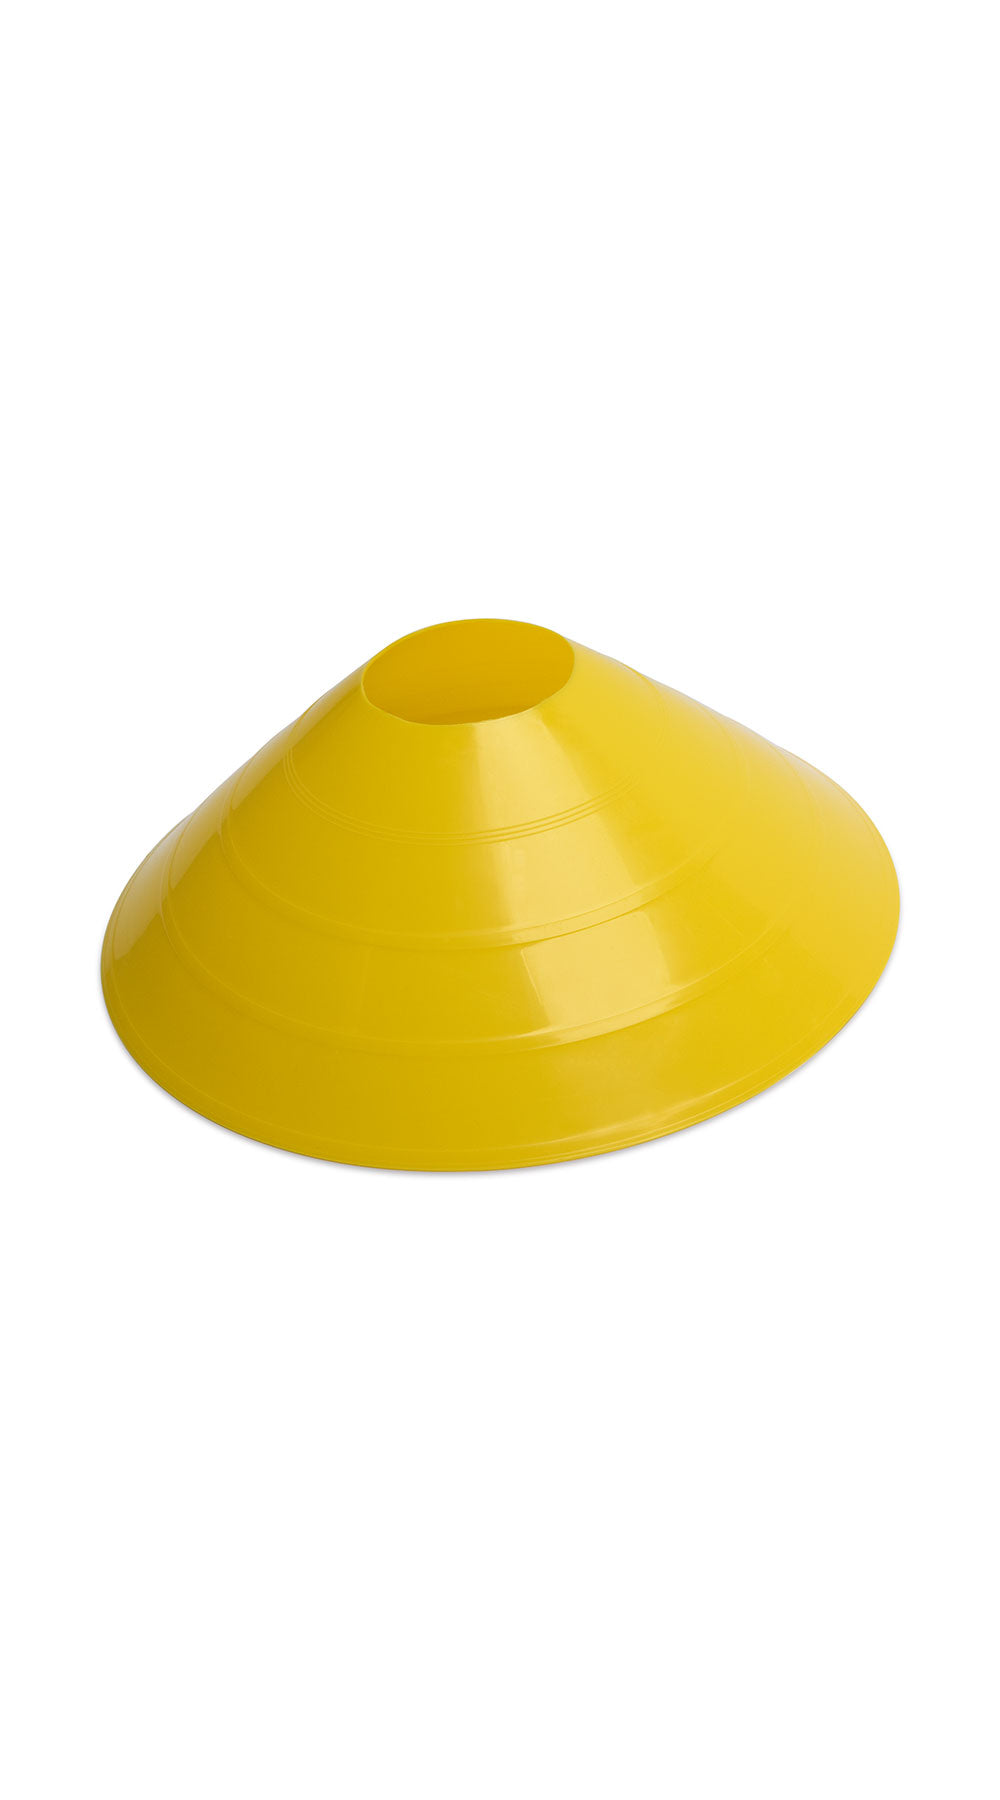 Large Saucer Cone Series Yellow RHINO accessories Agility Cone fitness indoor outdoor